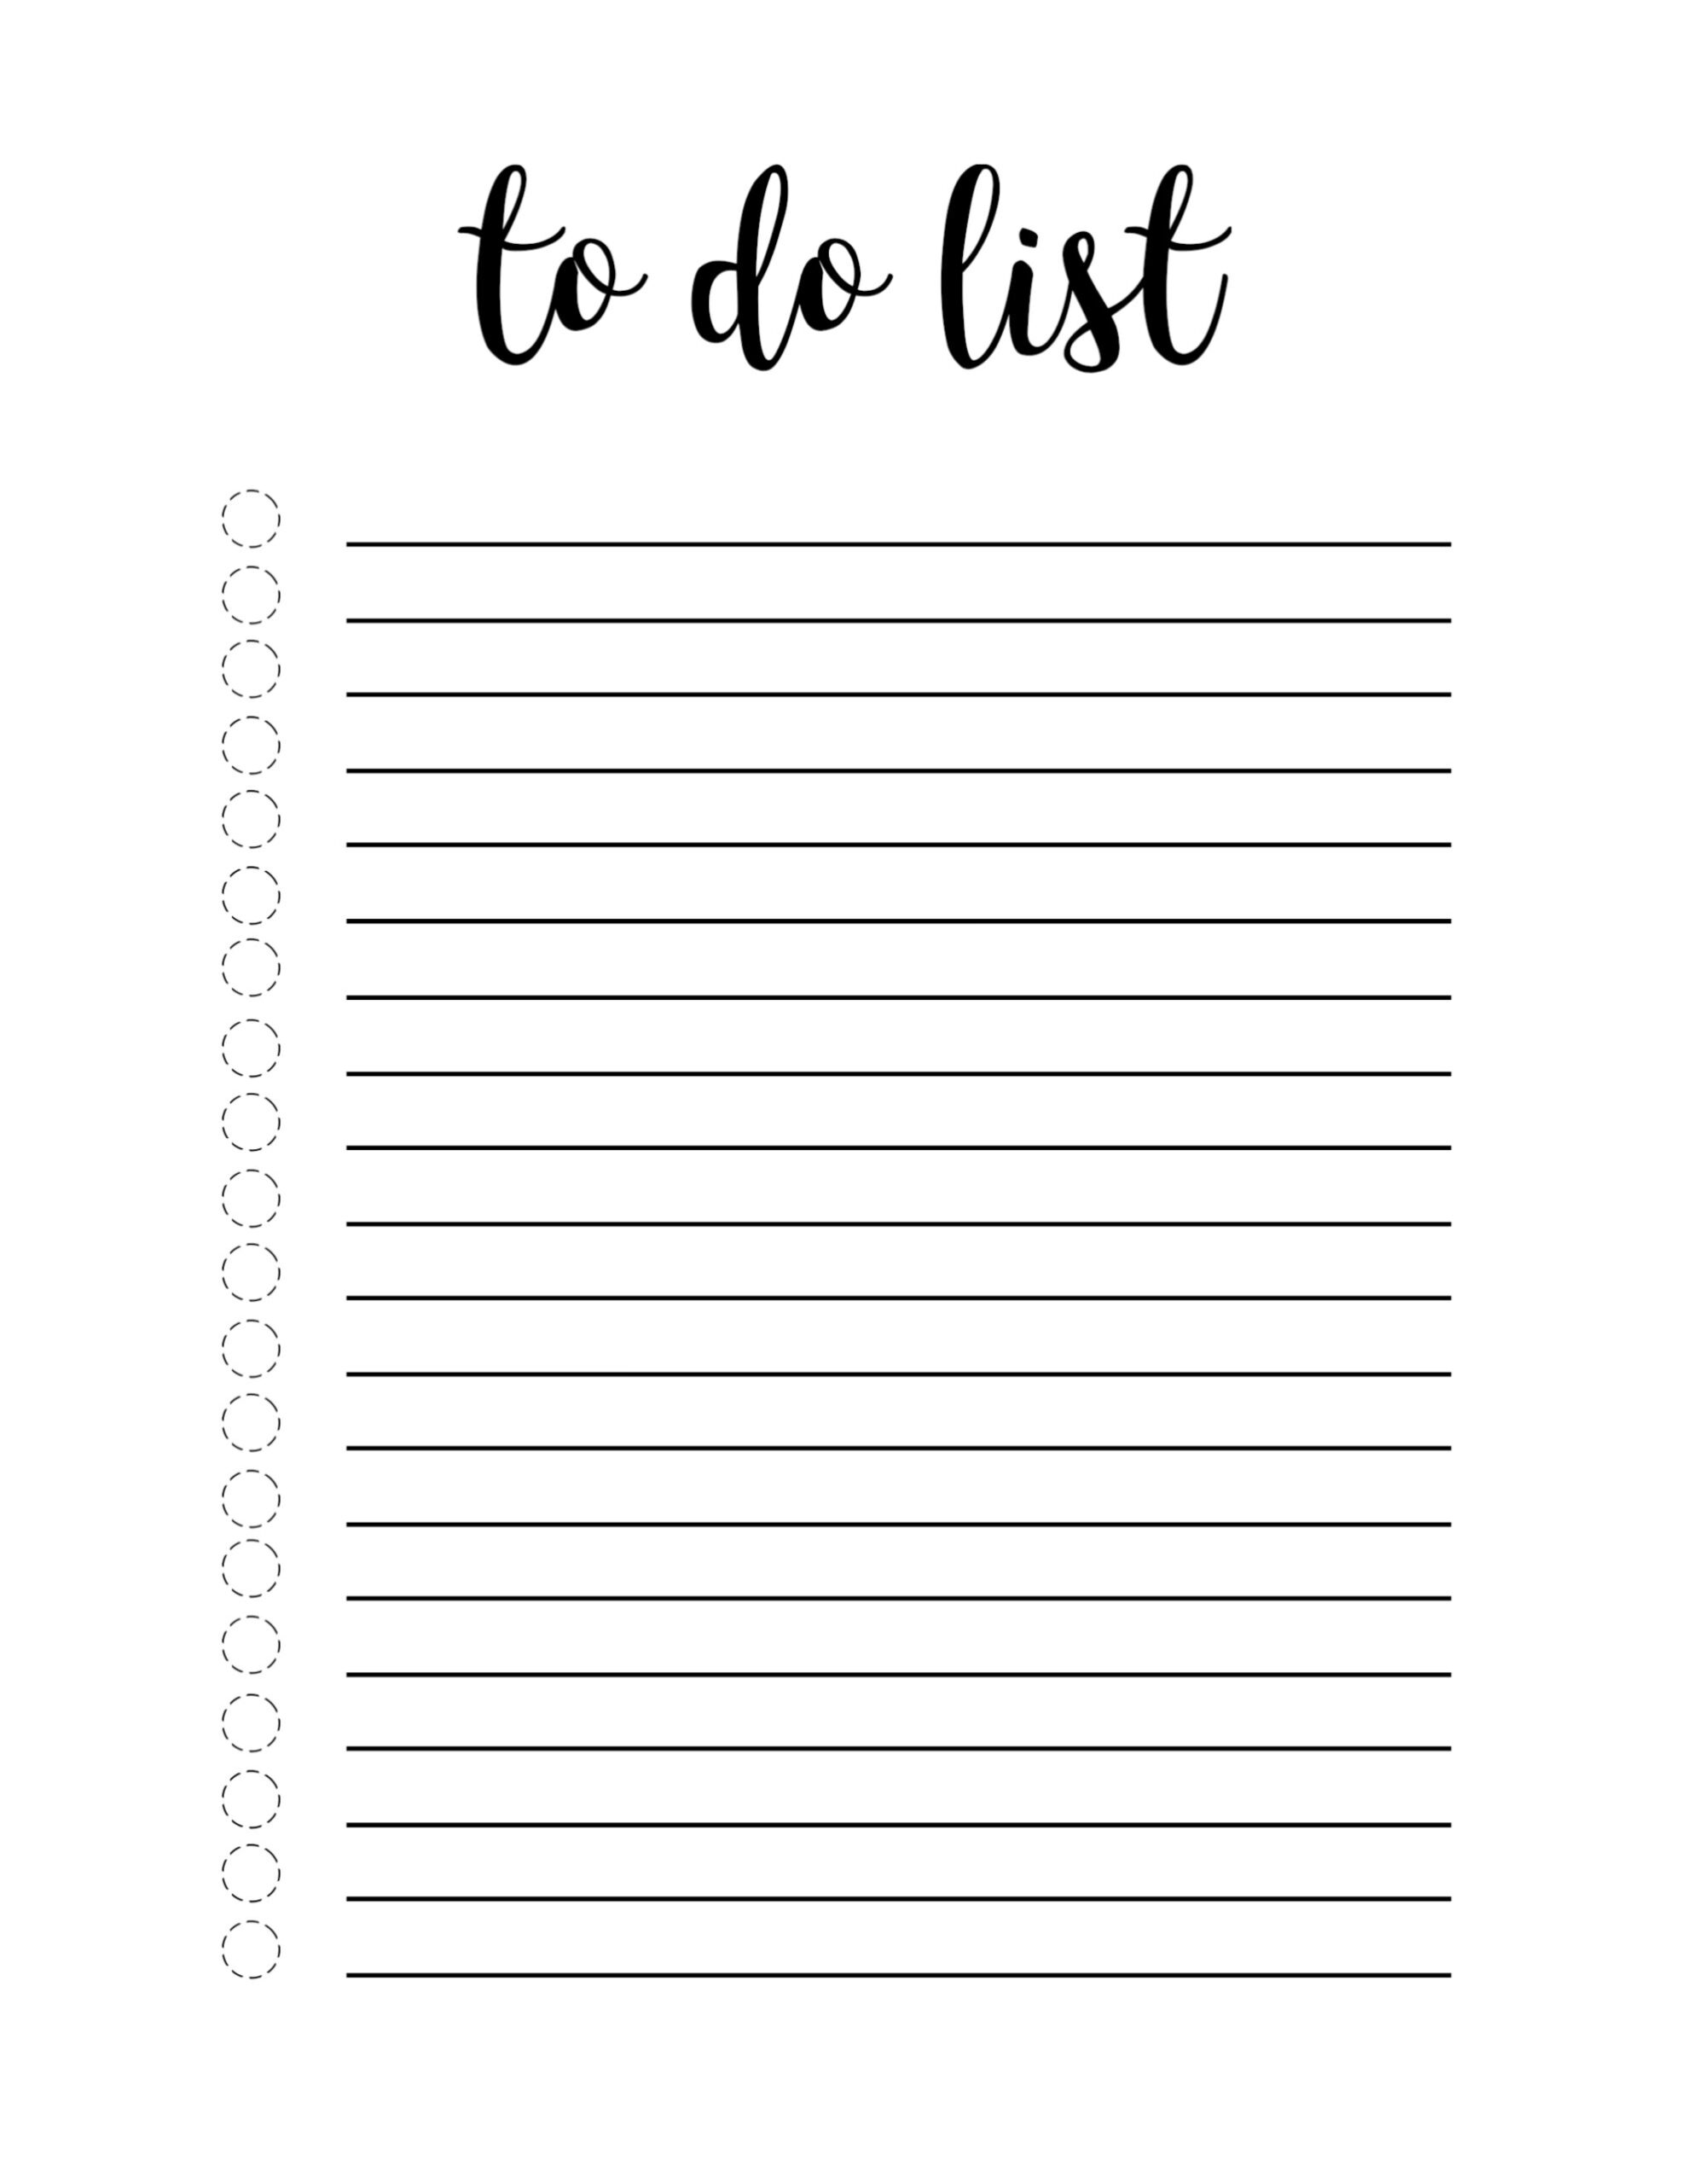 Free Printable To Do List Template - Paper Trail Design Intended For Blank To Do List Template